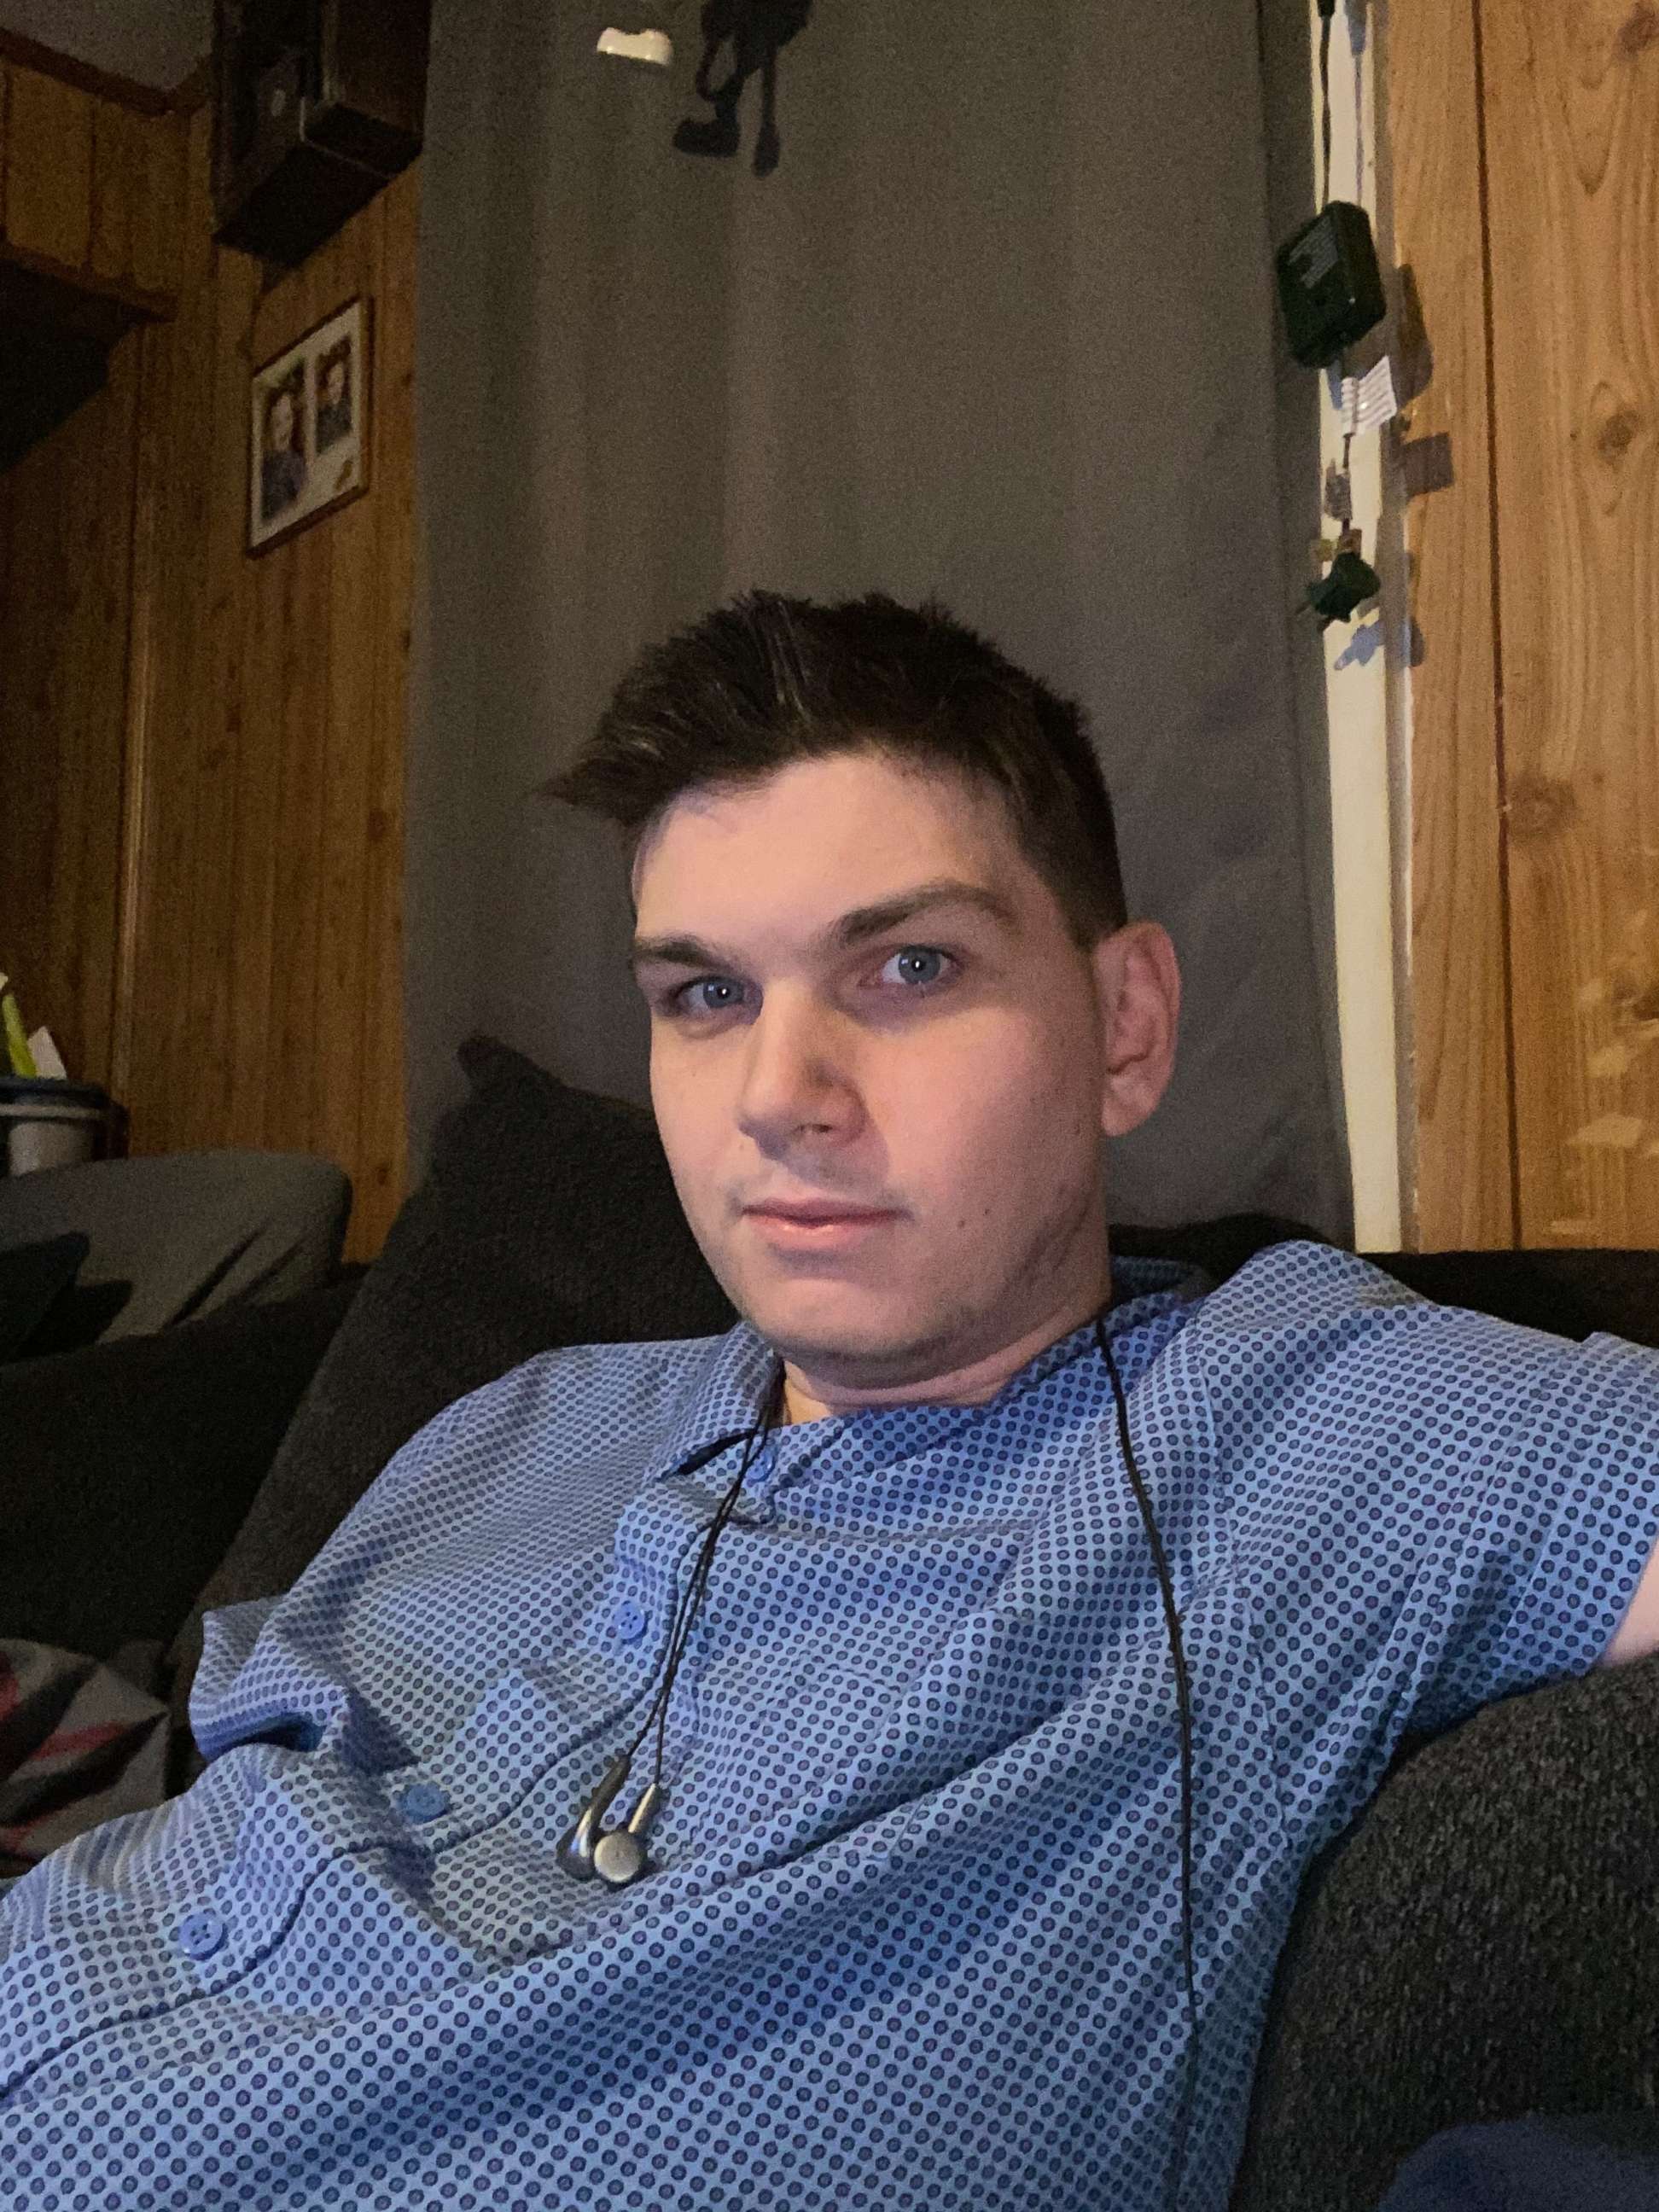 PHOTO: Marfan syndrome is a connective tissue disorder that affects 1 in 5,000 people. Seen in this undated photo is 20-year-old Matthew Wilson who was diagnosed with aneurysm, which may be a sign of the disorder.